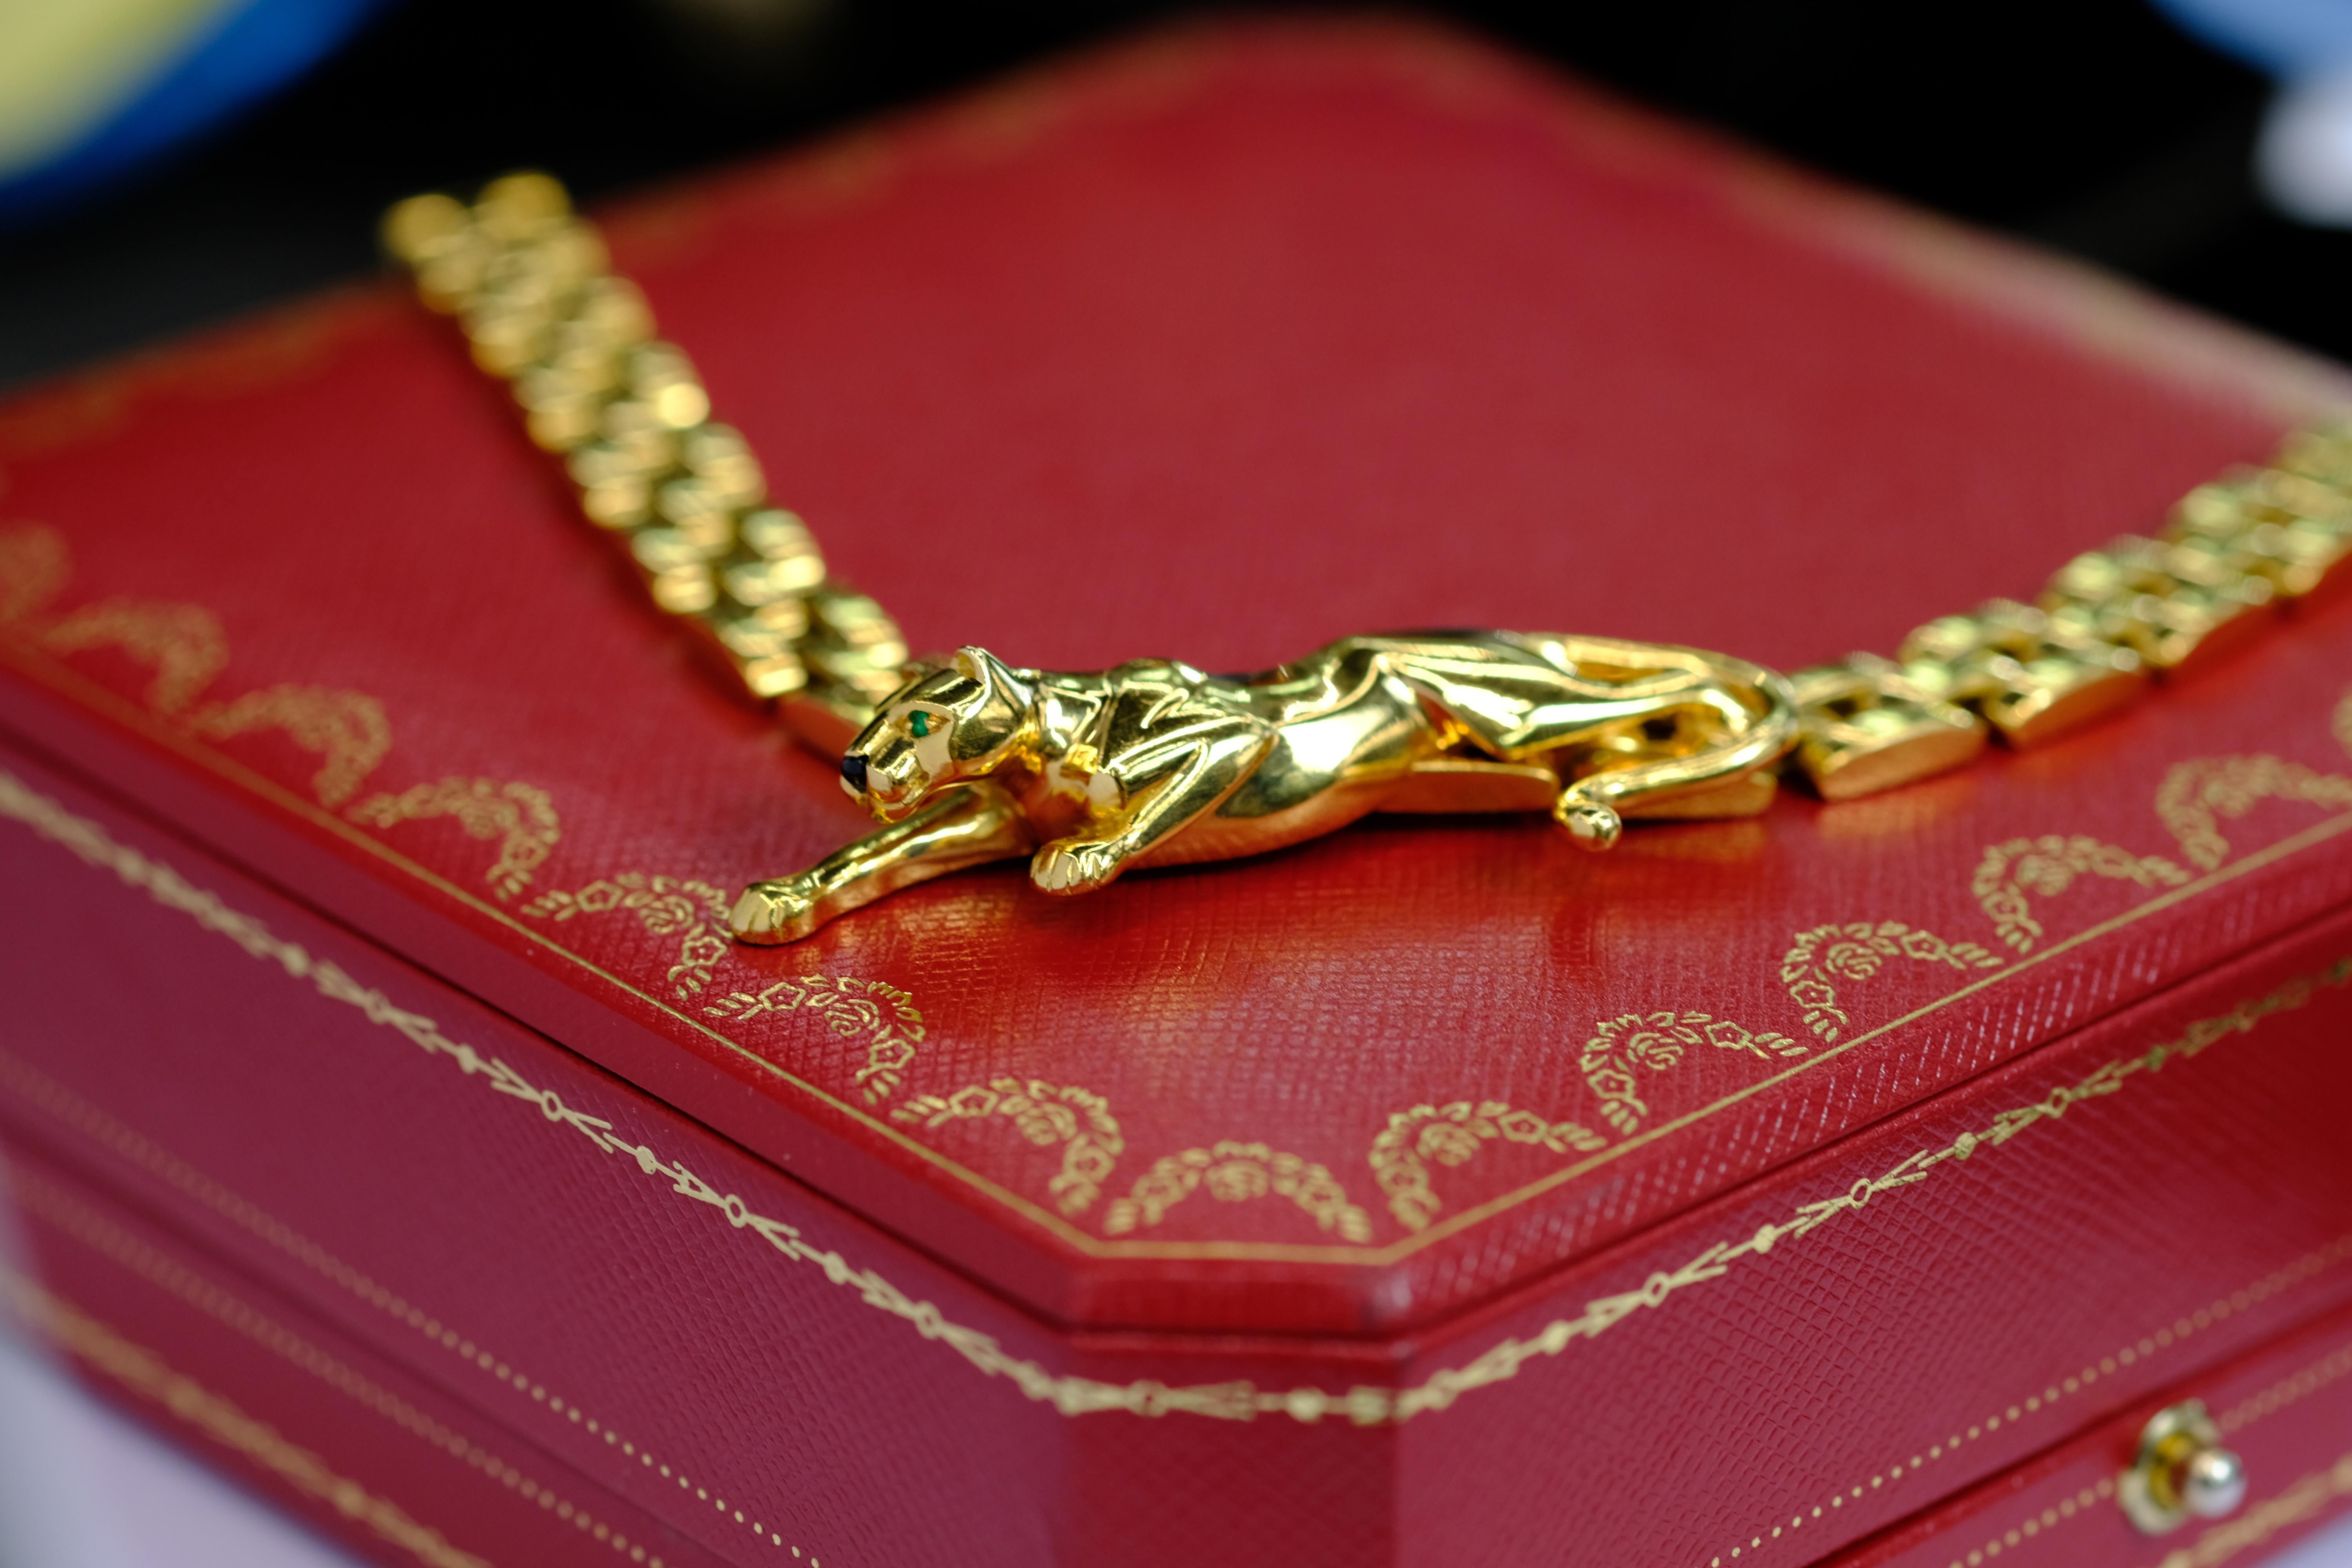 Cartier 18K Yellow Gold Maillon Panthere Link Chain Vintage Necklace For Sale 5